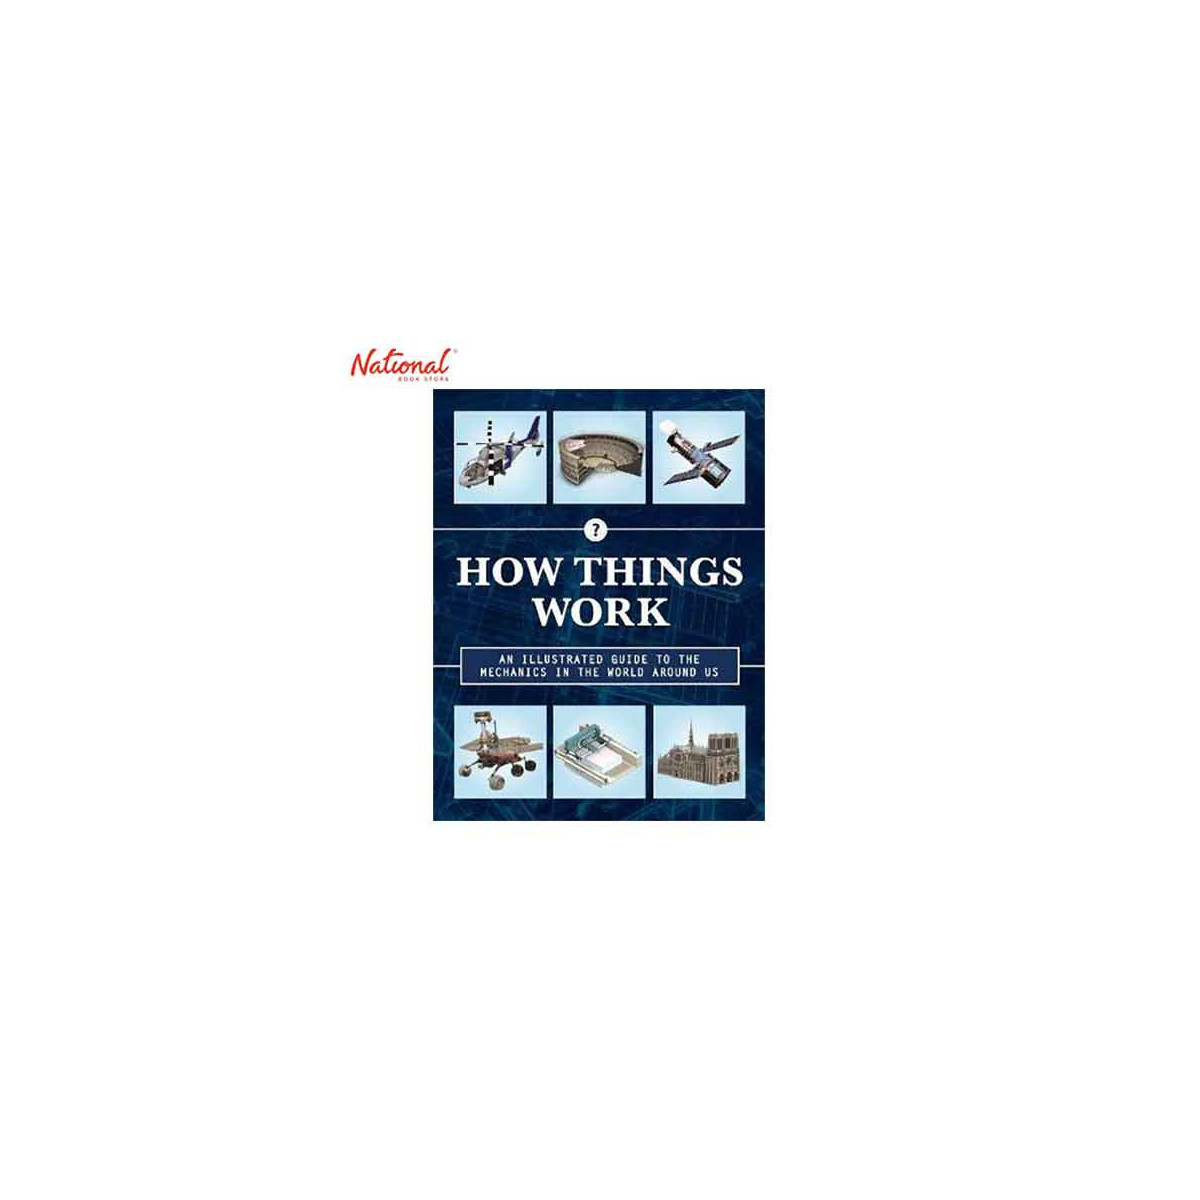 HOW THINGS WORK 2ND EDITION: AN ILLUSTRATED GUIDE TO THE MECHANICS BEHIND THE WORLD AROUND US HARDCOVER